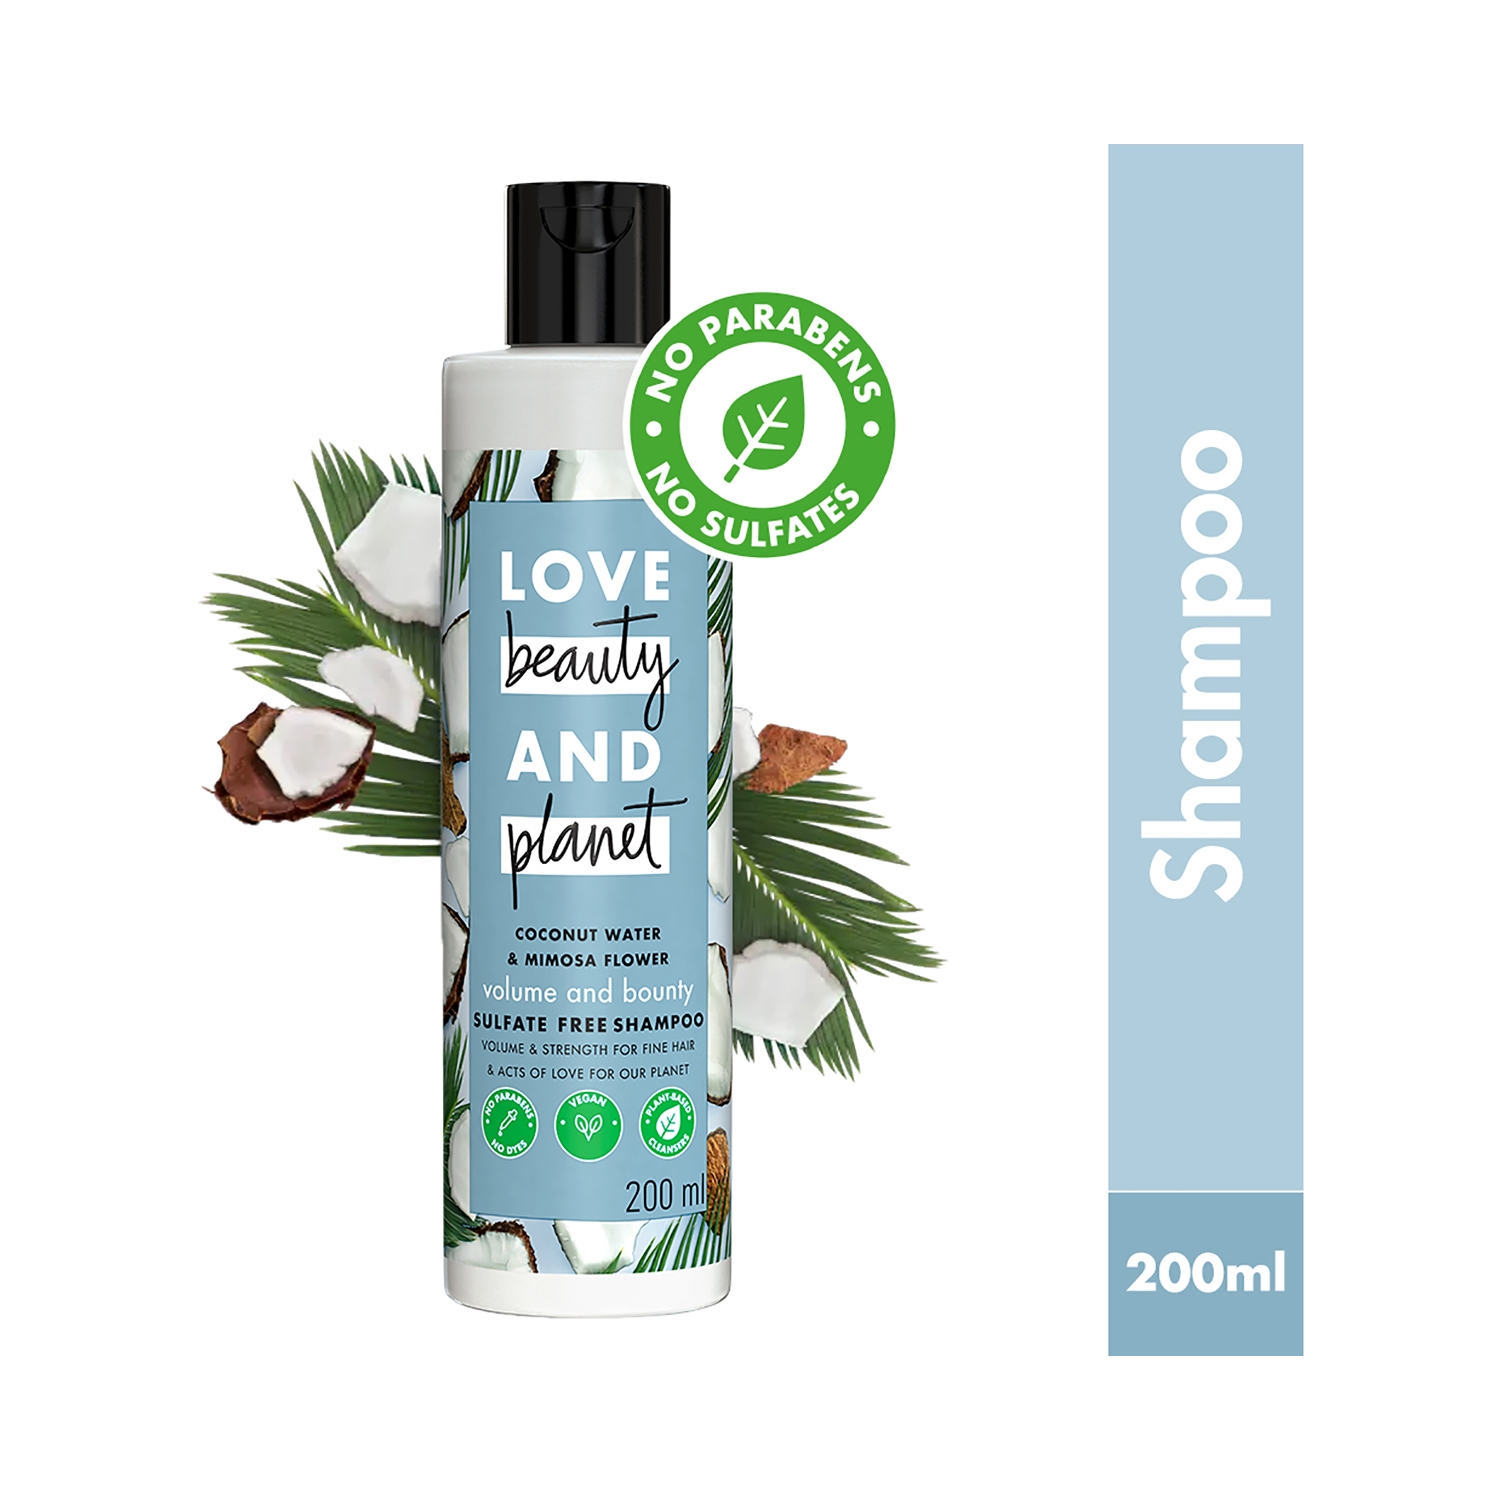 Love Beauty & Planet | Love Beauty & Planet Coconut Water and Mimosa Flower Volume and Bounty Shampoo (200ml)